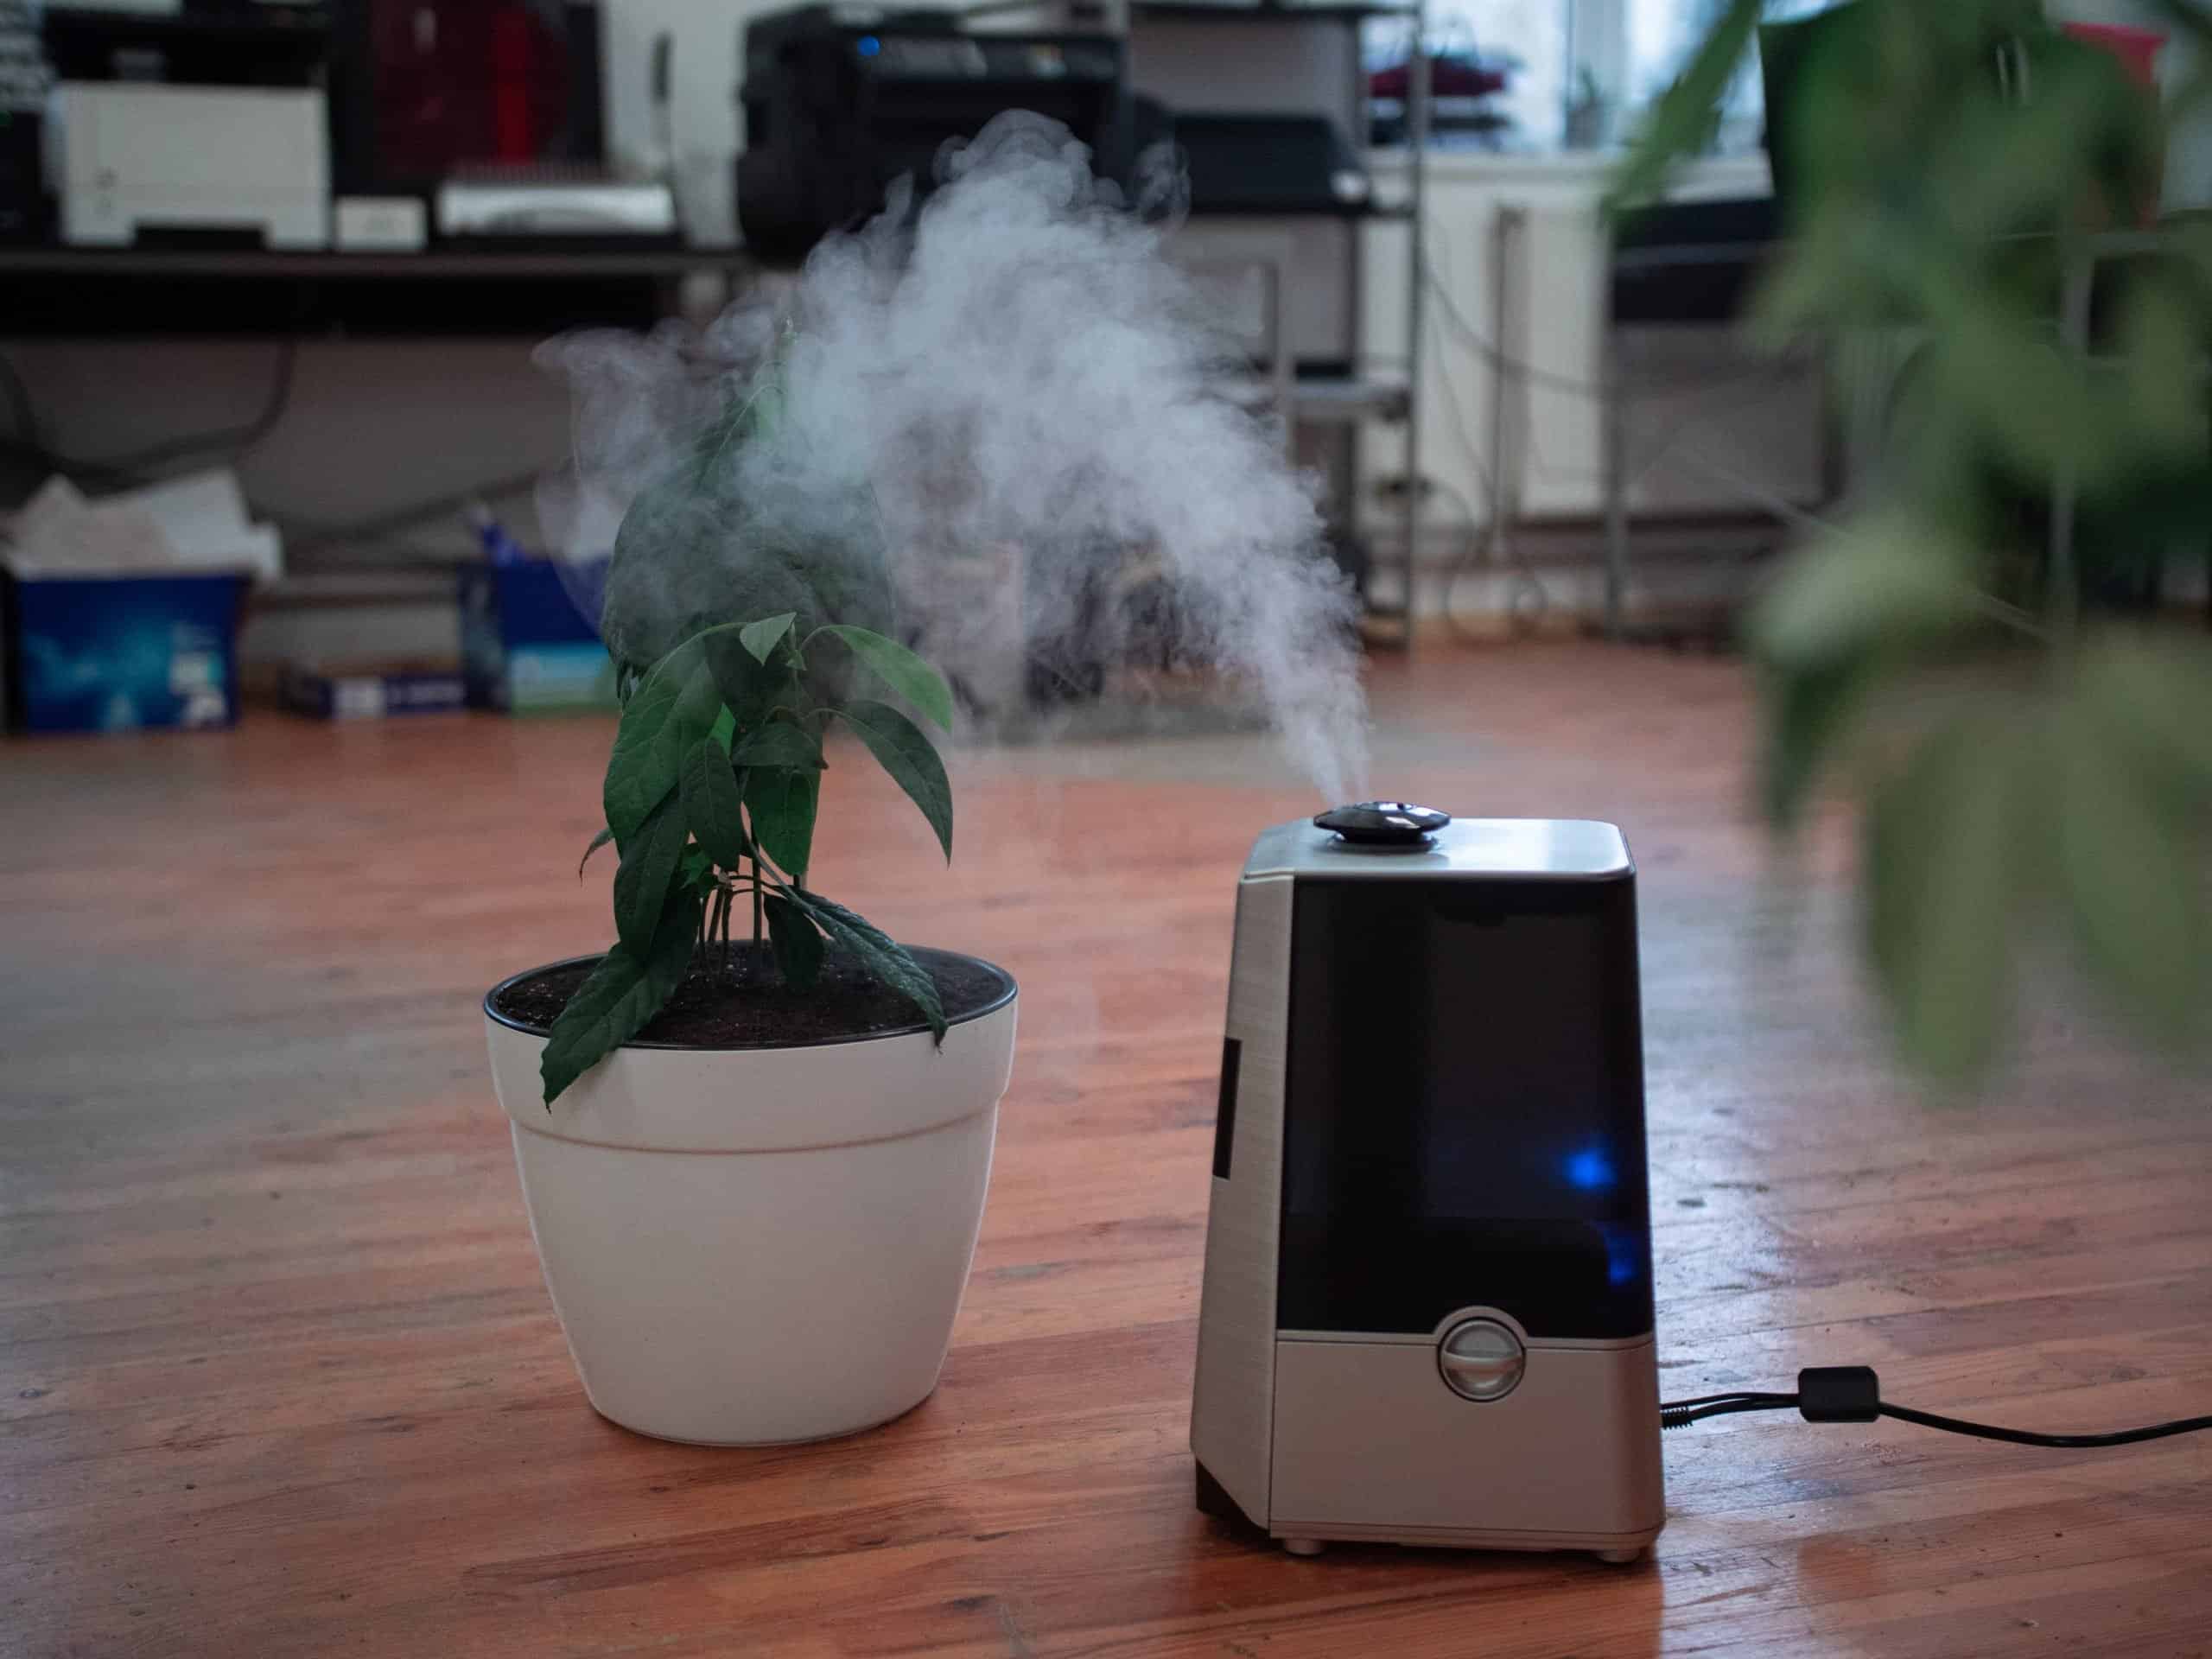 Humidifier turned on next to a small plant on the floor